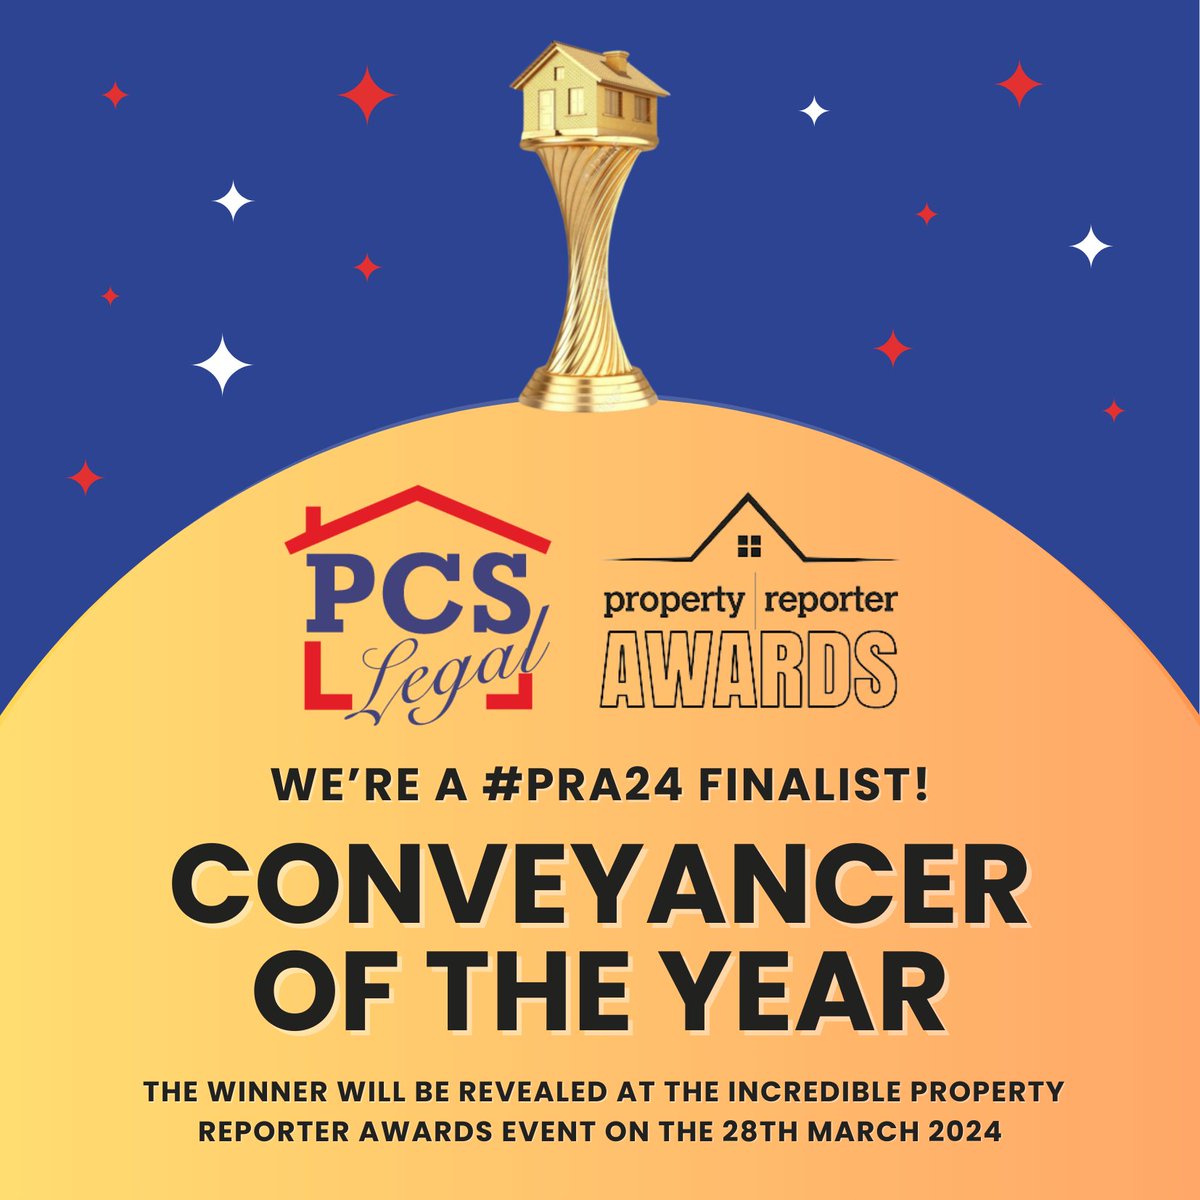 We're very proud to be a #PRA24 finalist at this year's Property Reporter Awards! 🎉

The winner of Conveyancer of the Year will be announced at the London event on the 28th March! 🏆

@propertyr

#award #awards #PCSLegal #conveyancer #conveyancing #property #ukproperty #lawfirm